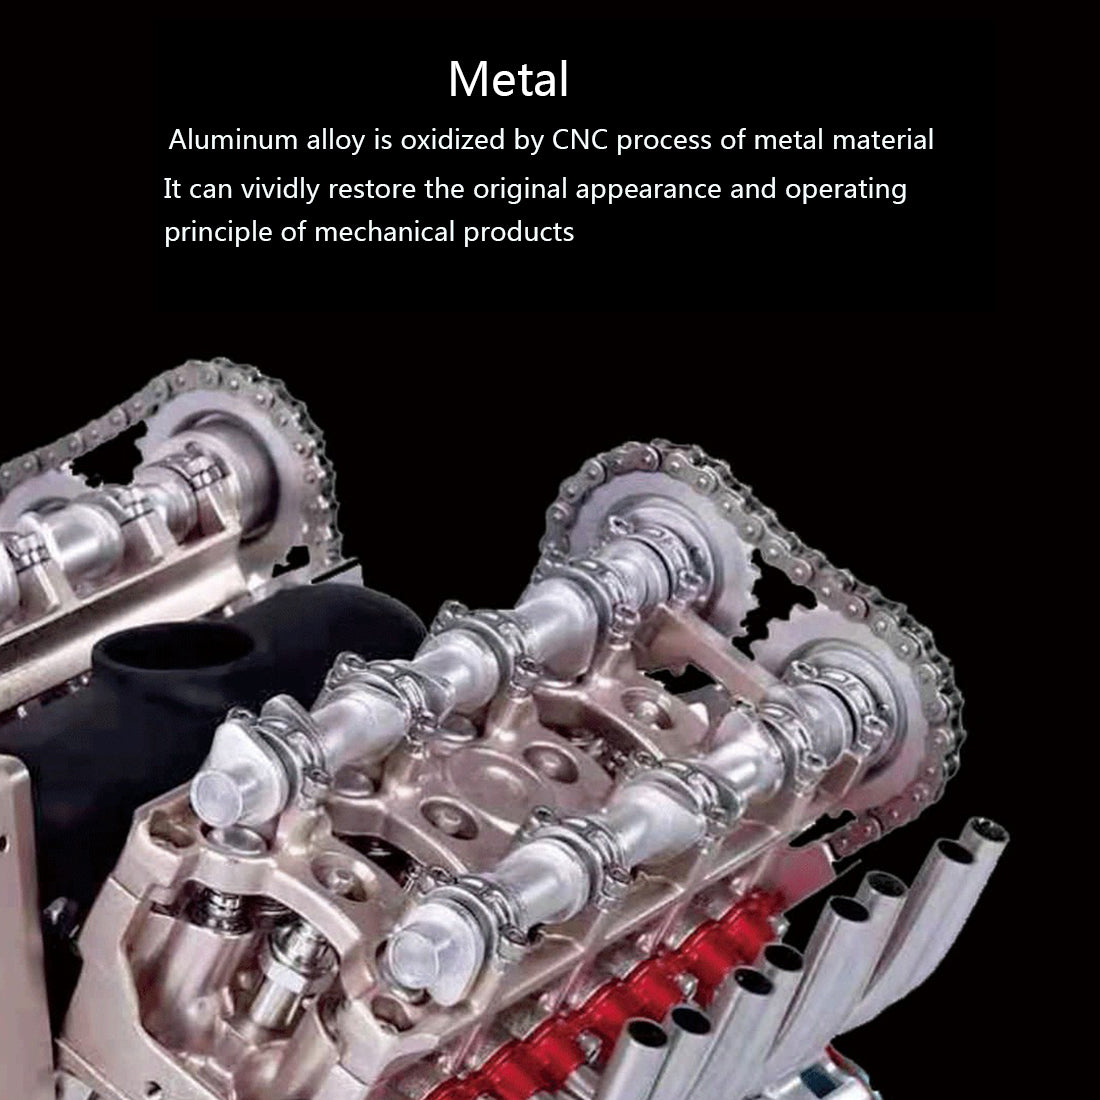 V8 Engine TECHING 3D Metal Mechanical Engine Model Science Experiment